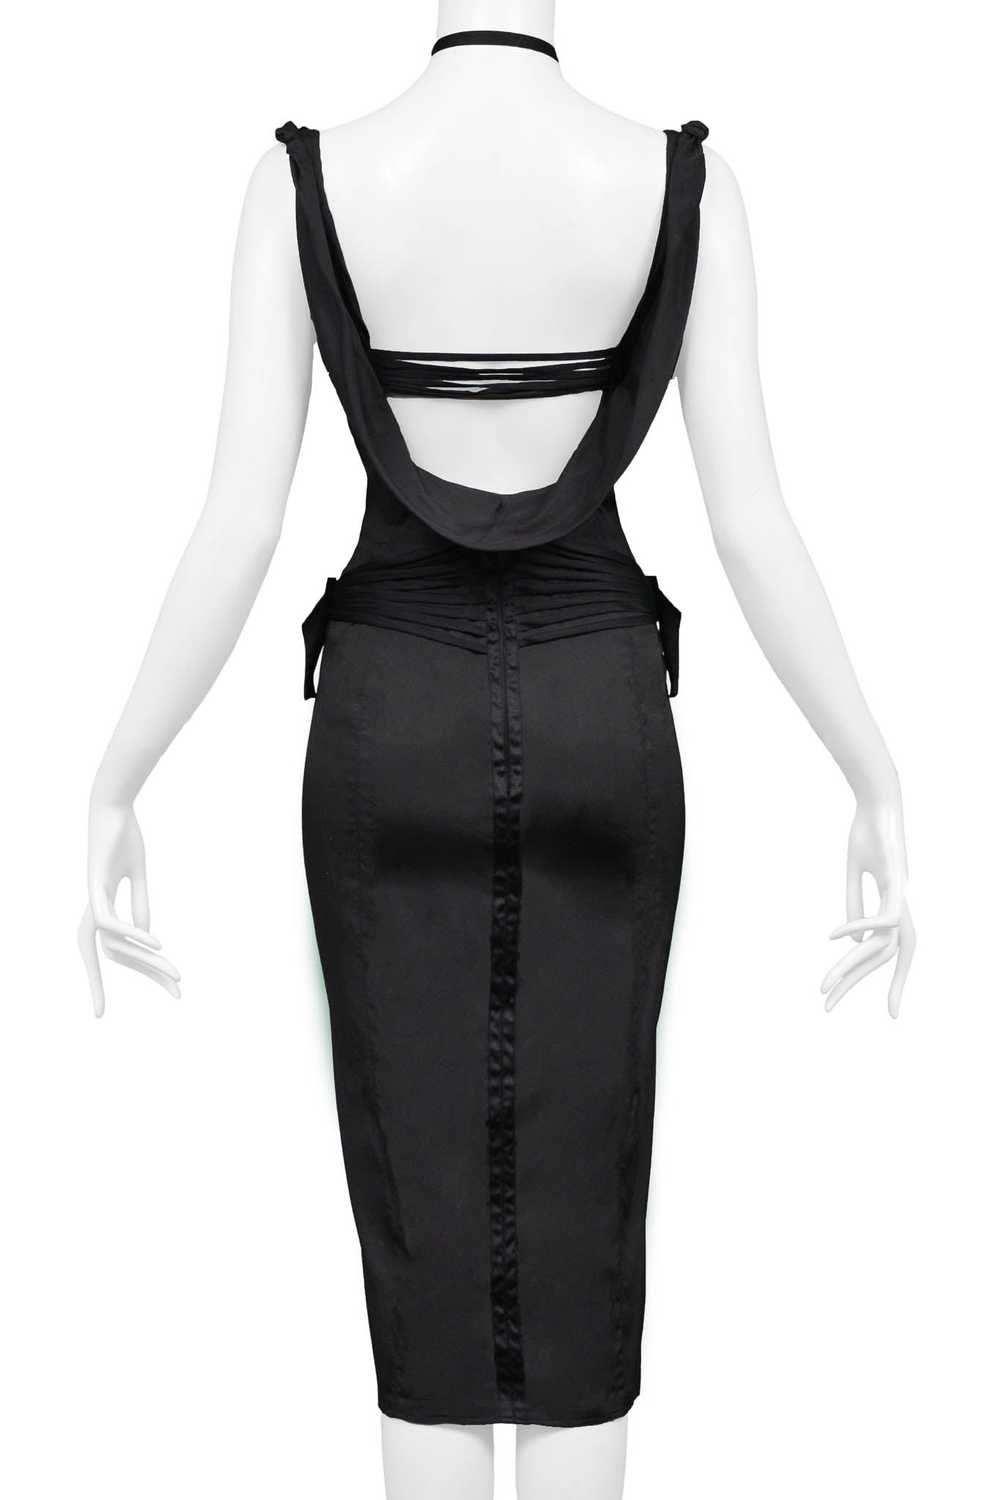 GUCCI BY TOM FORD BLACK CORSET COCKTAIL DRESS 2003 - image 11